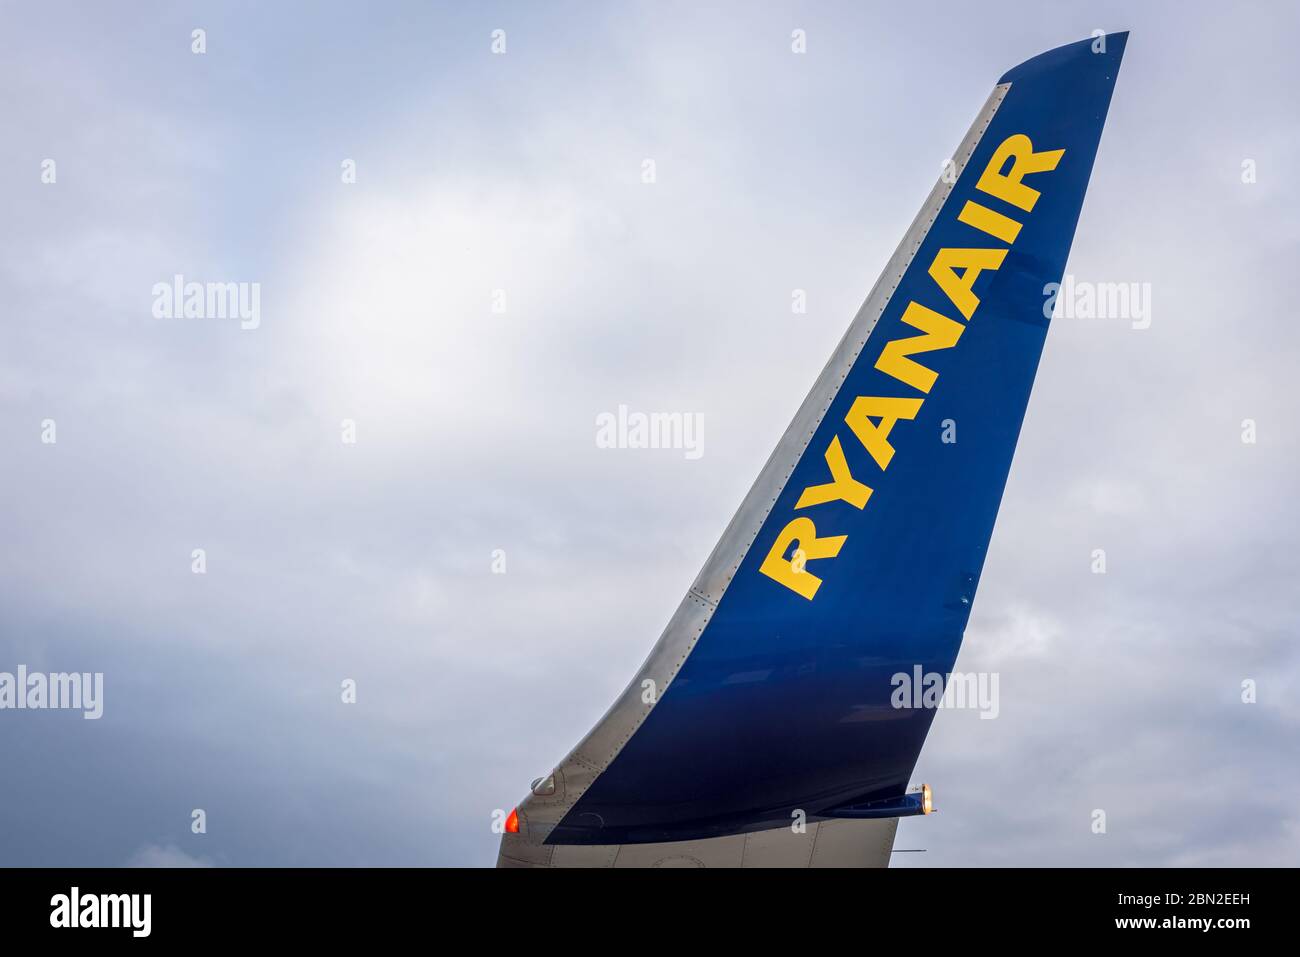 View of a grounded Ryanair plane wing with yellow and blue logo in an airport runway. Stock Photo